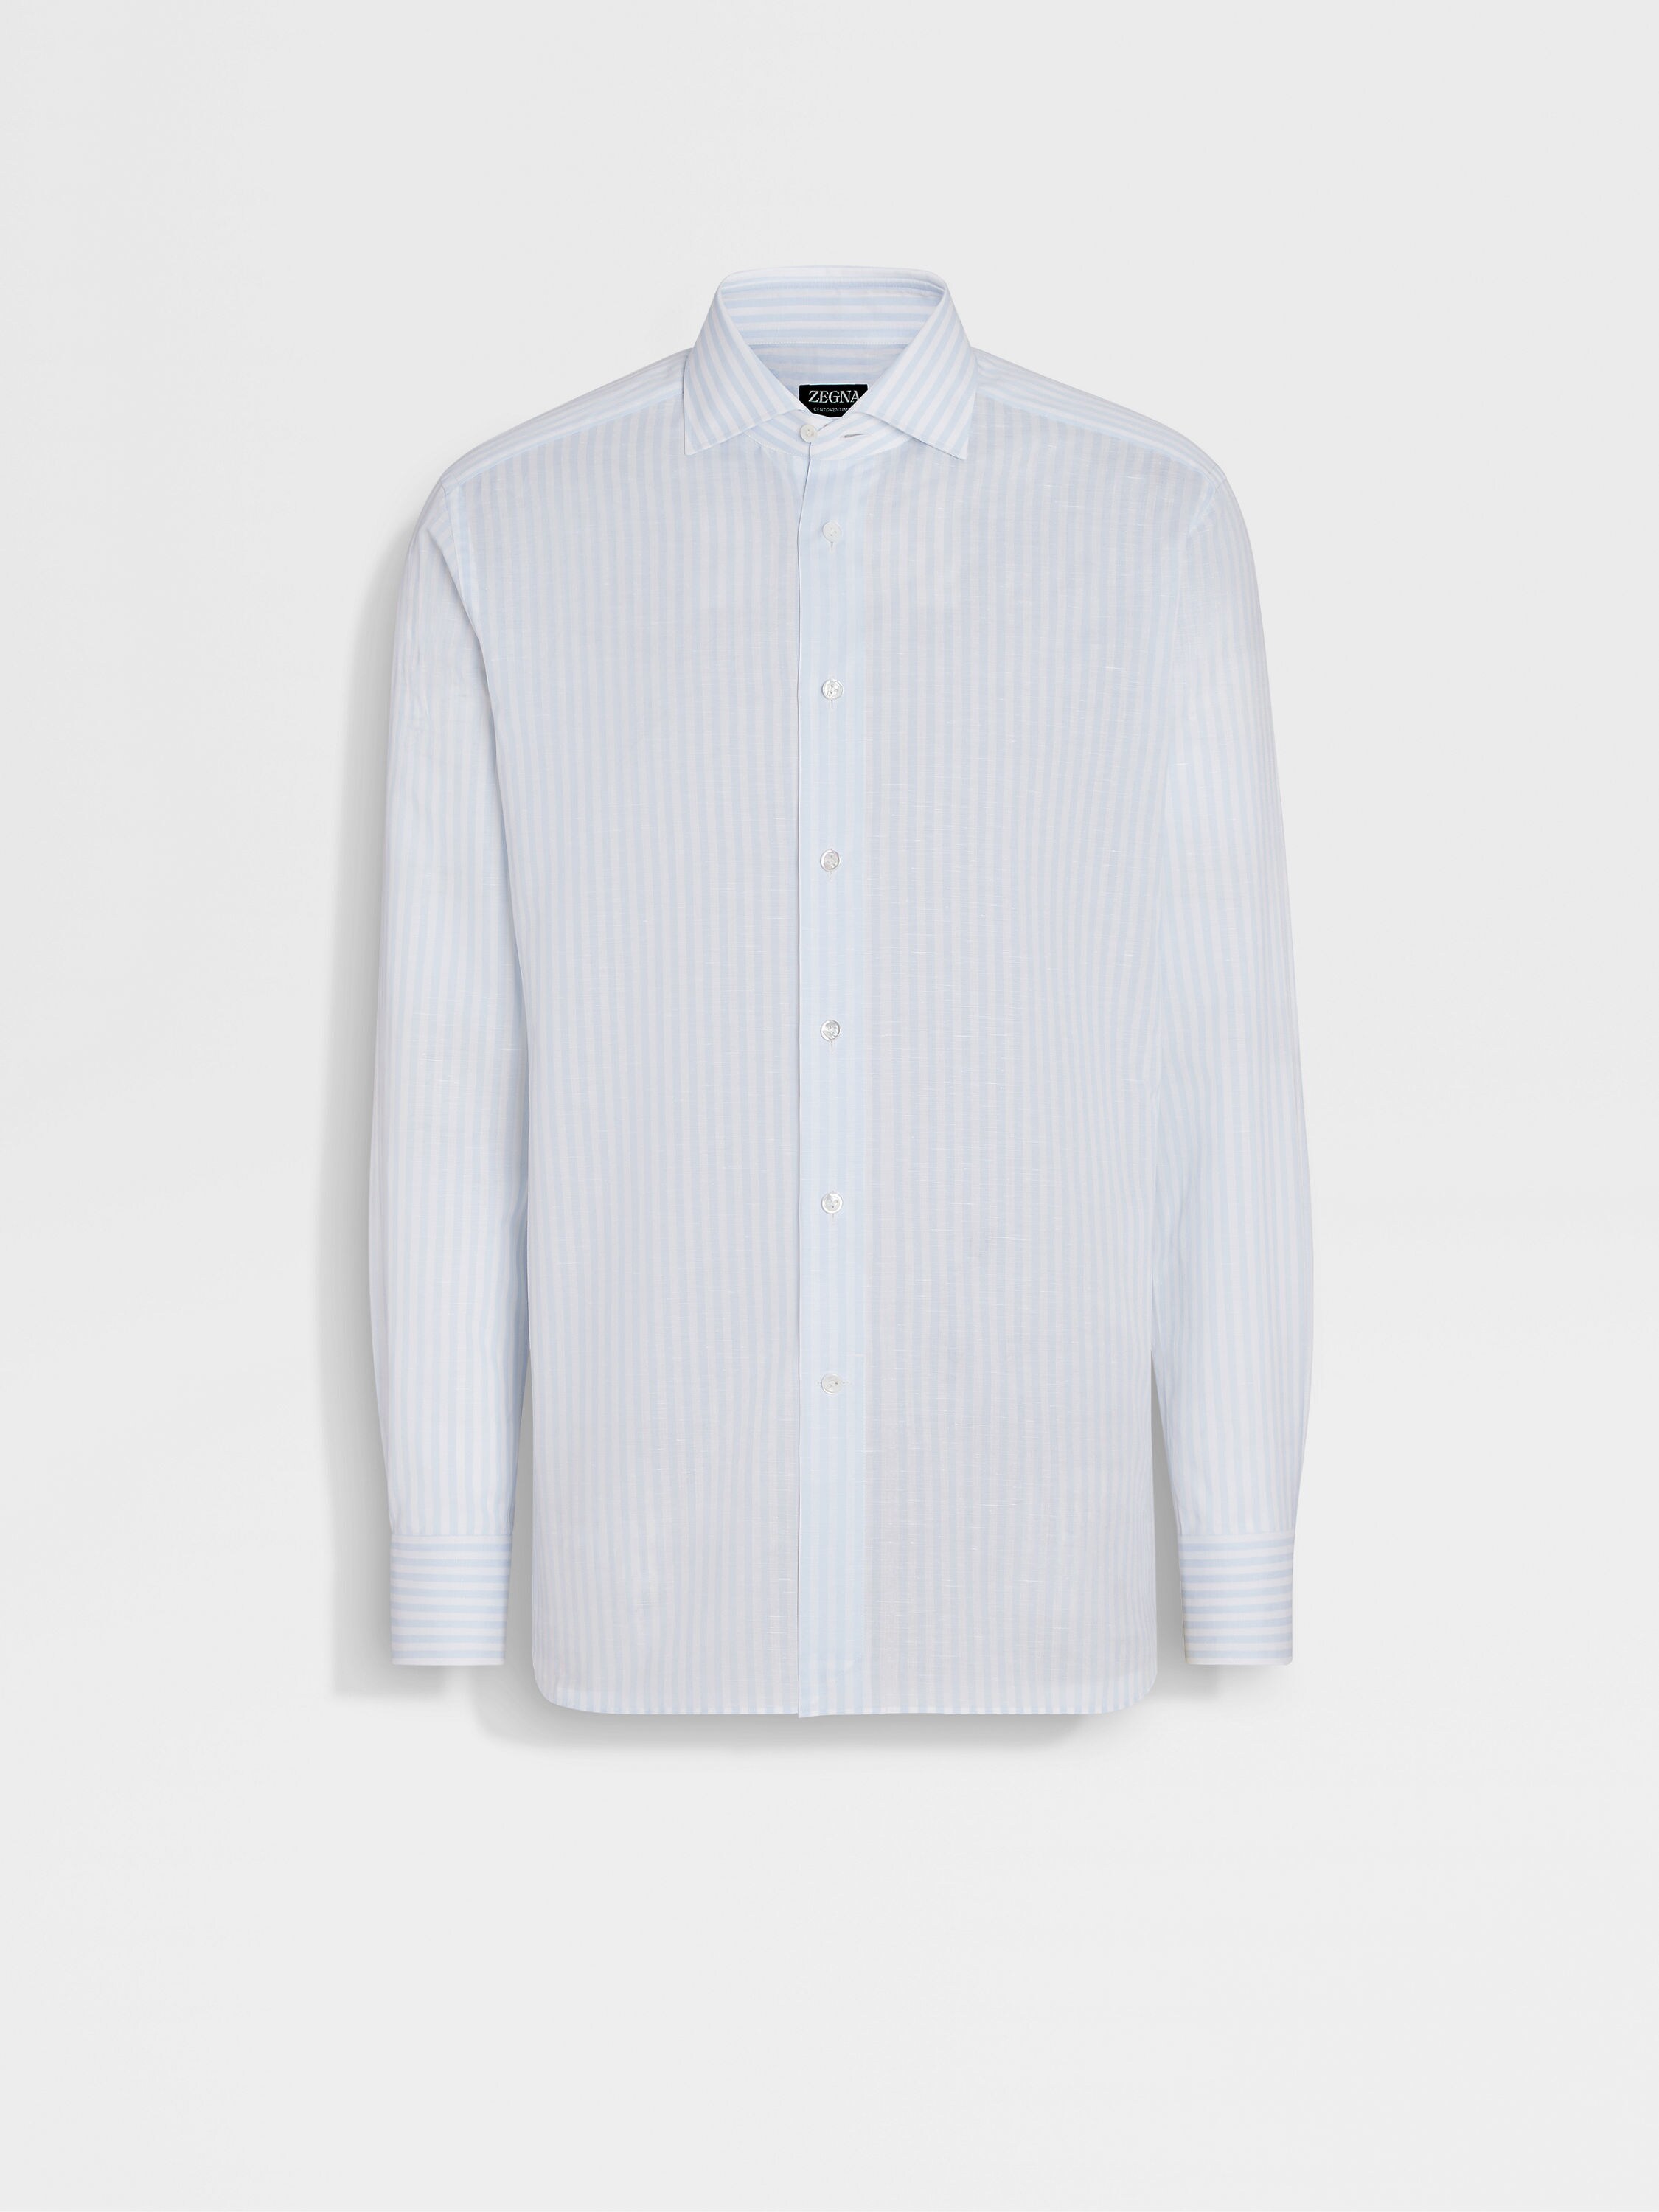 Light Blue and White Striped Centoventimila Cotton and Linen Shirt